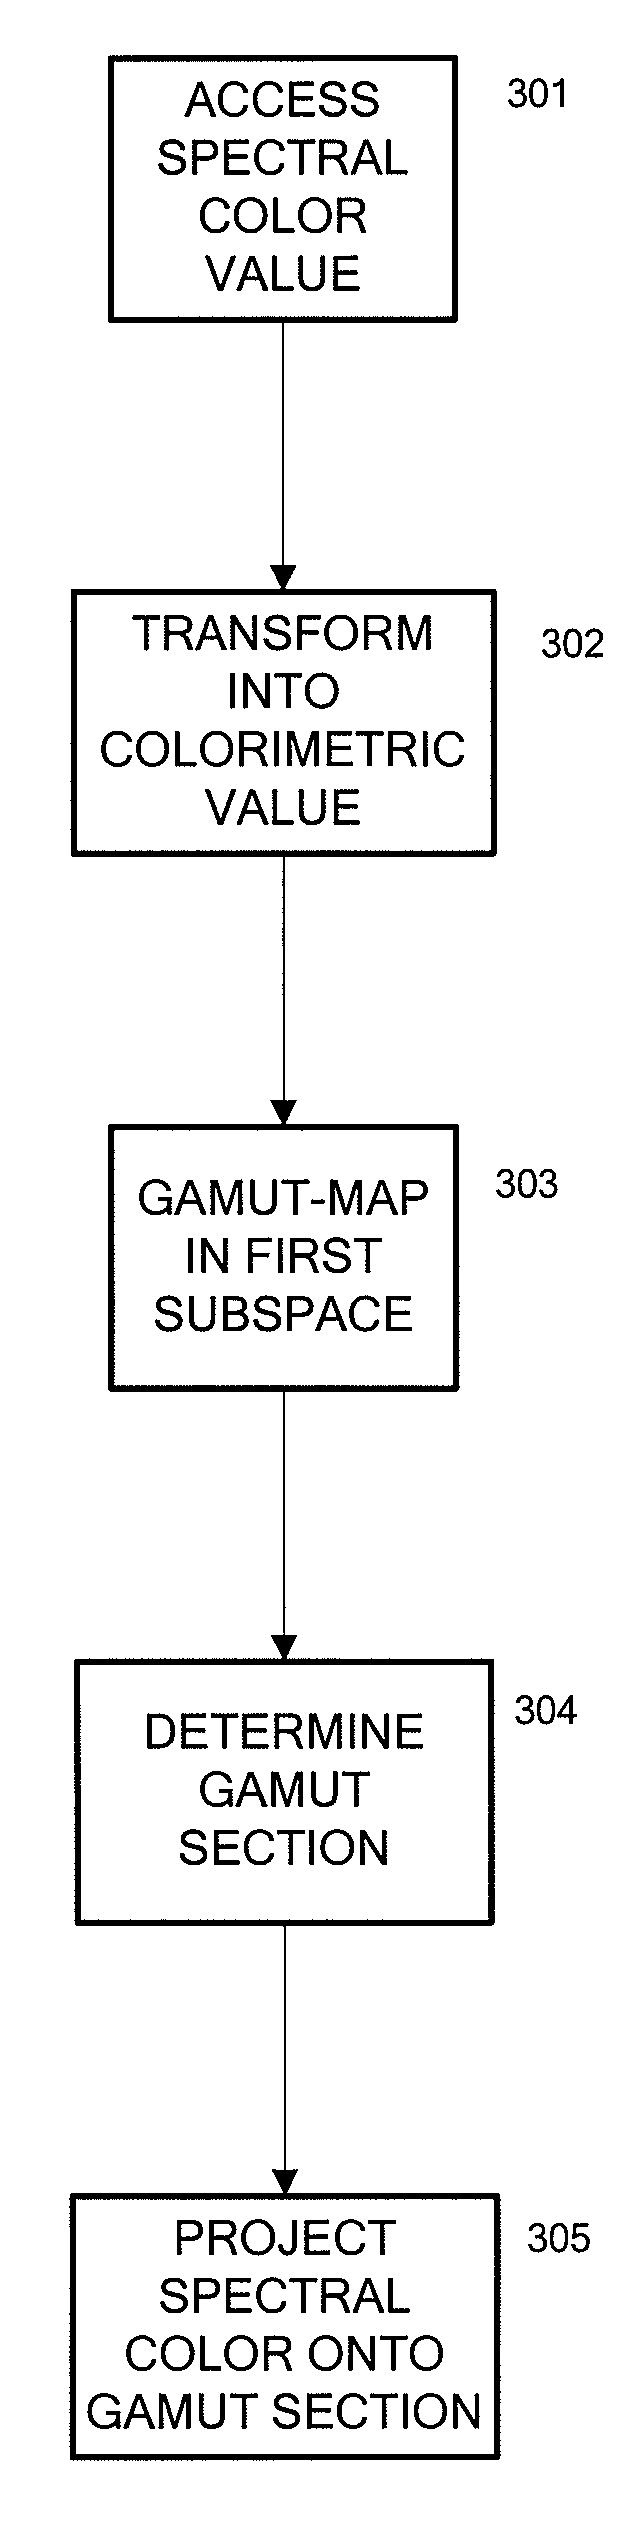 Spectral gamut mapping based on a colorimetric gamut mapping